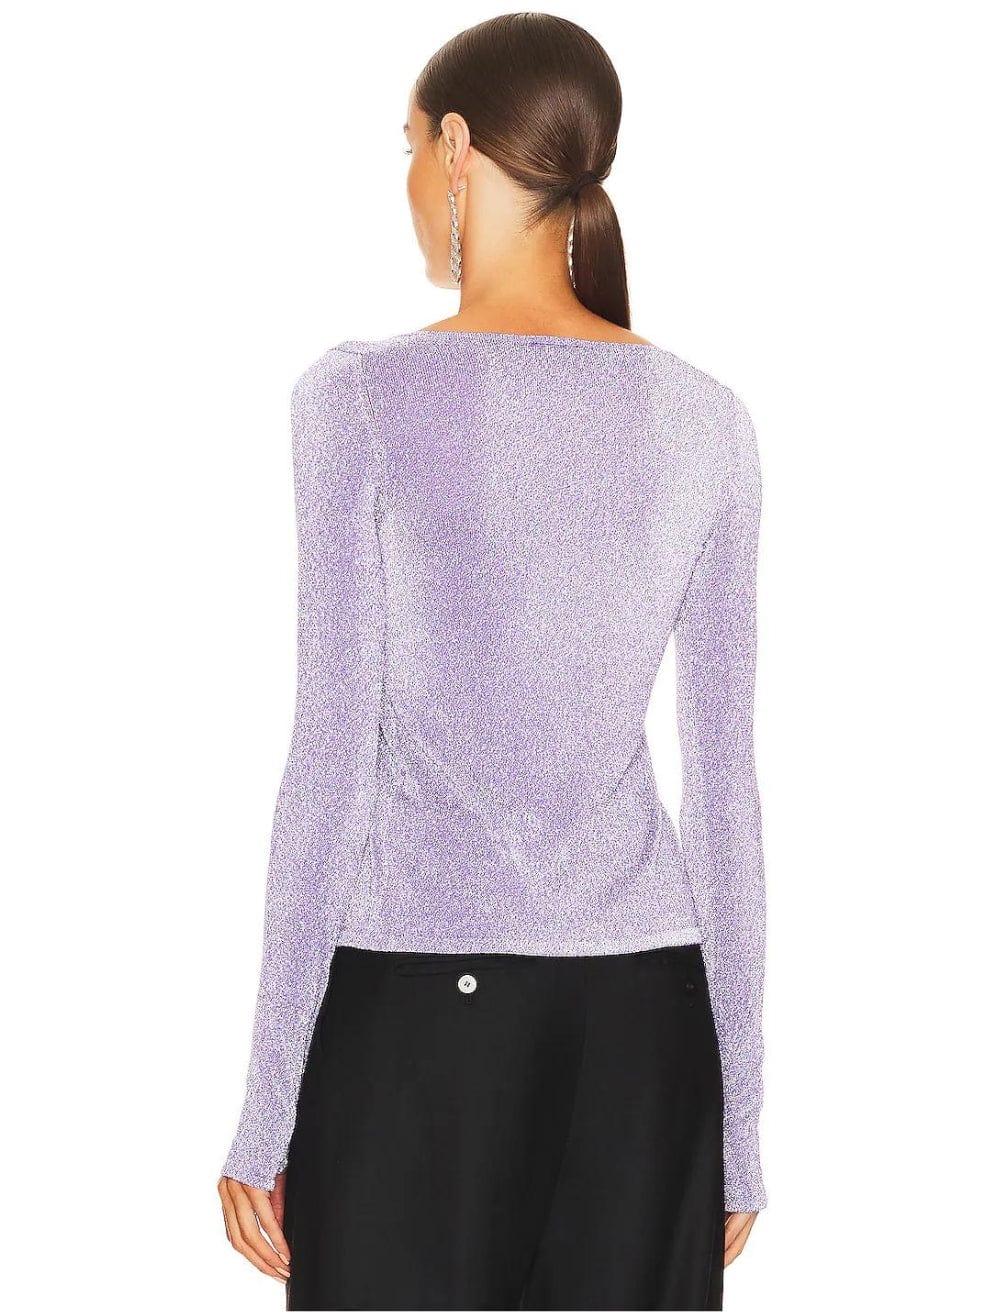 Reflective Top in Purple